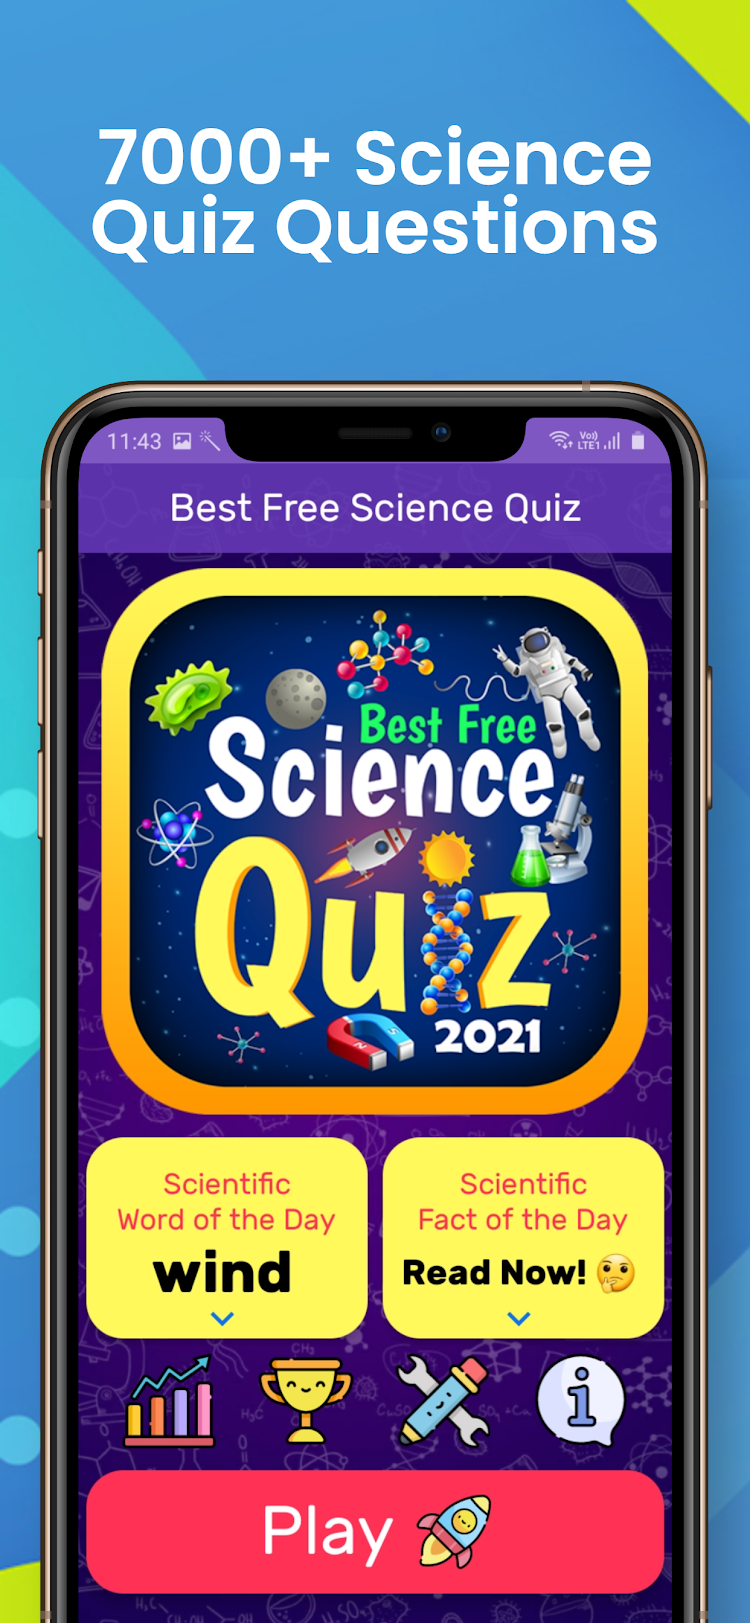 Best Free Science Quiz: New 2021 Version  Featured Image for Version 